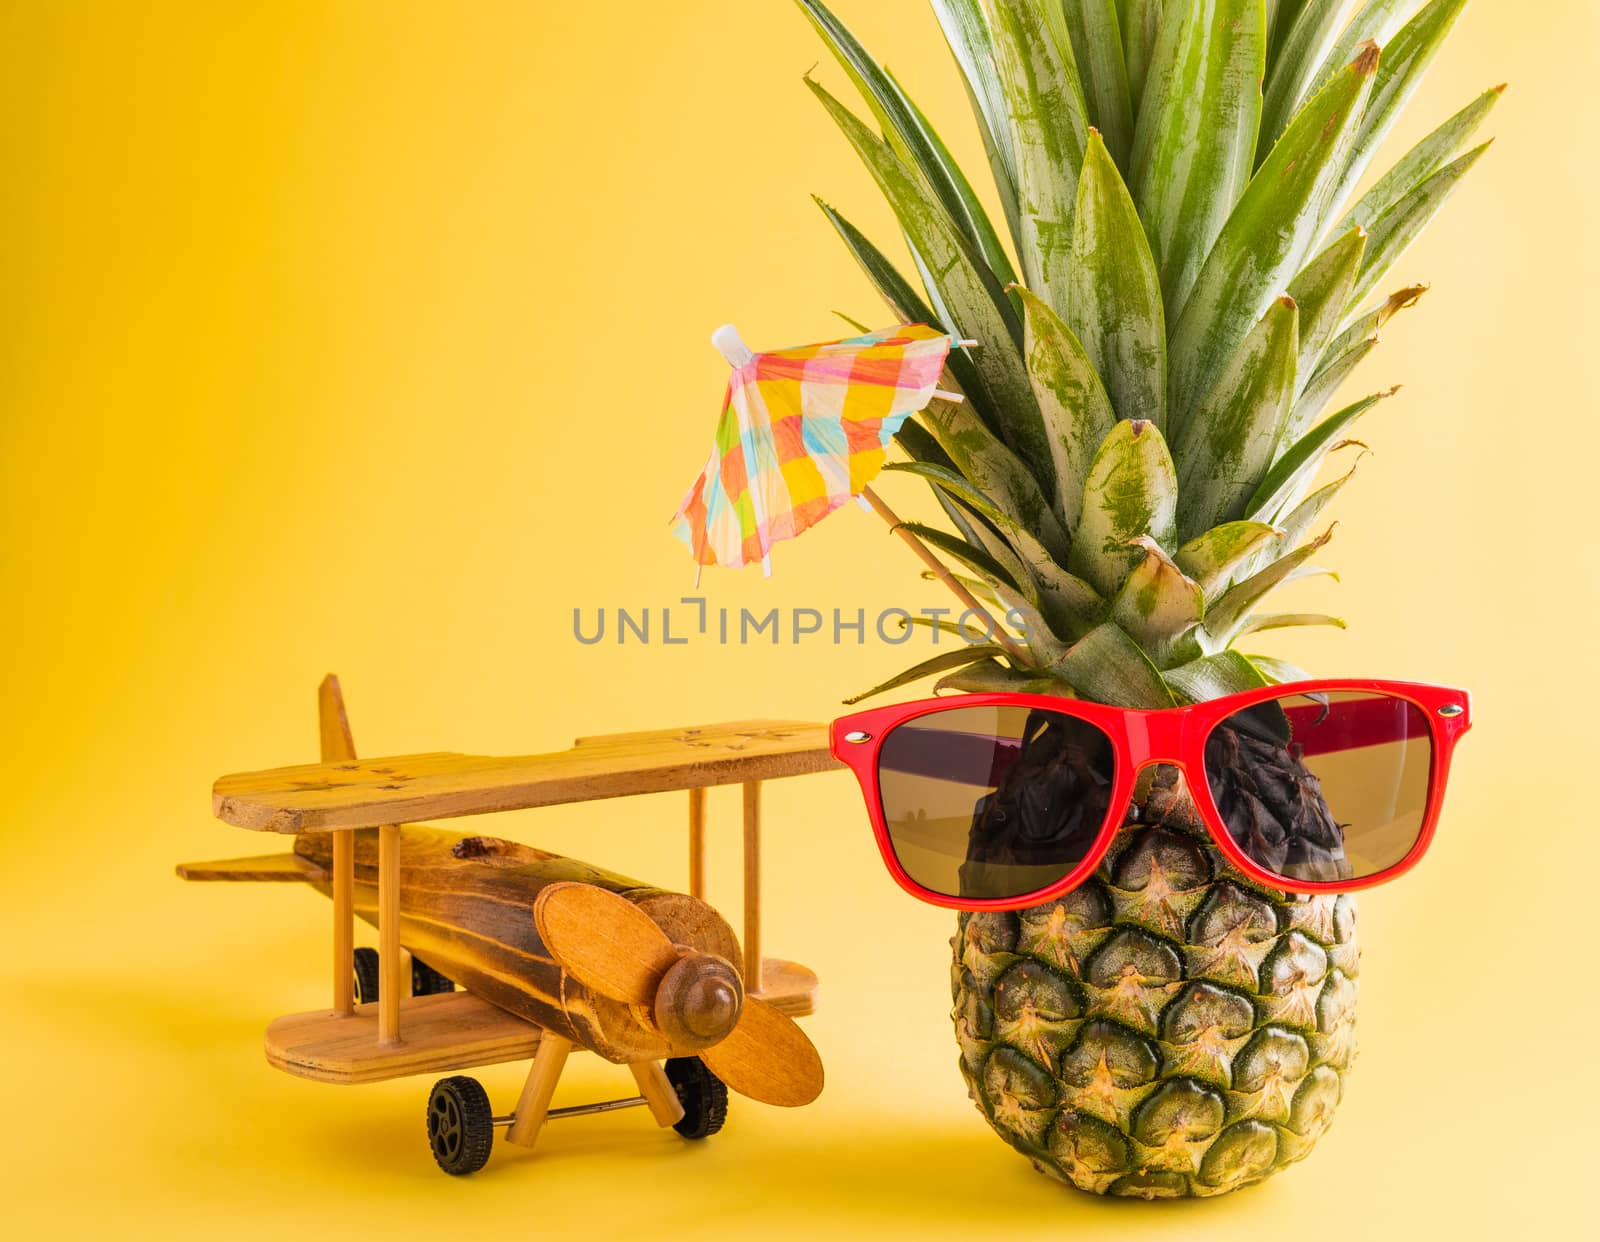 pineapple in sunglasses stands with a model plane by Sorapop